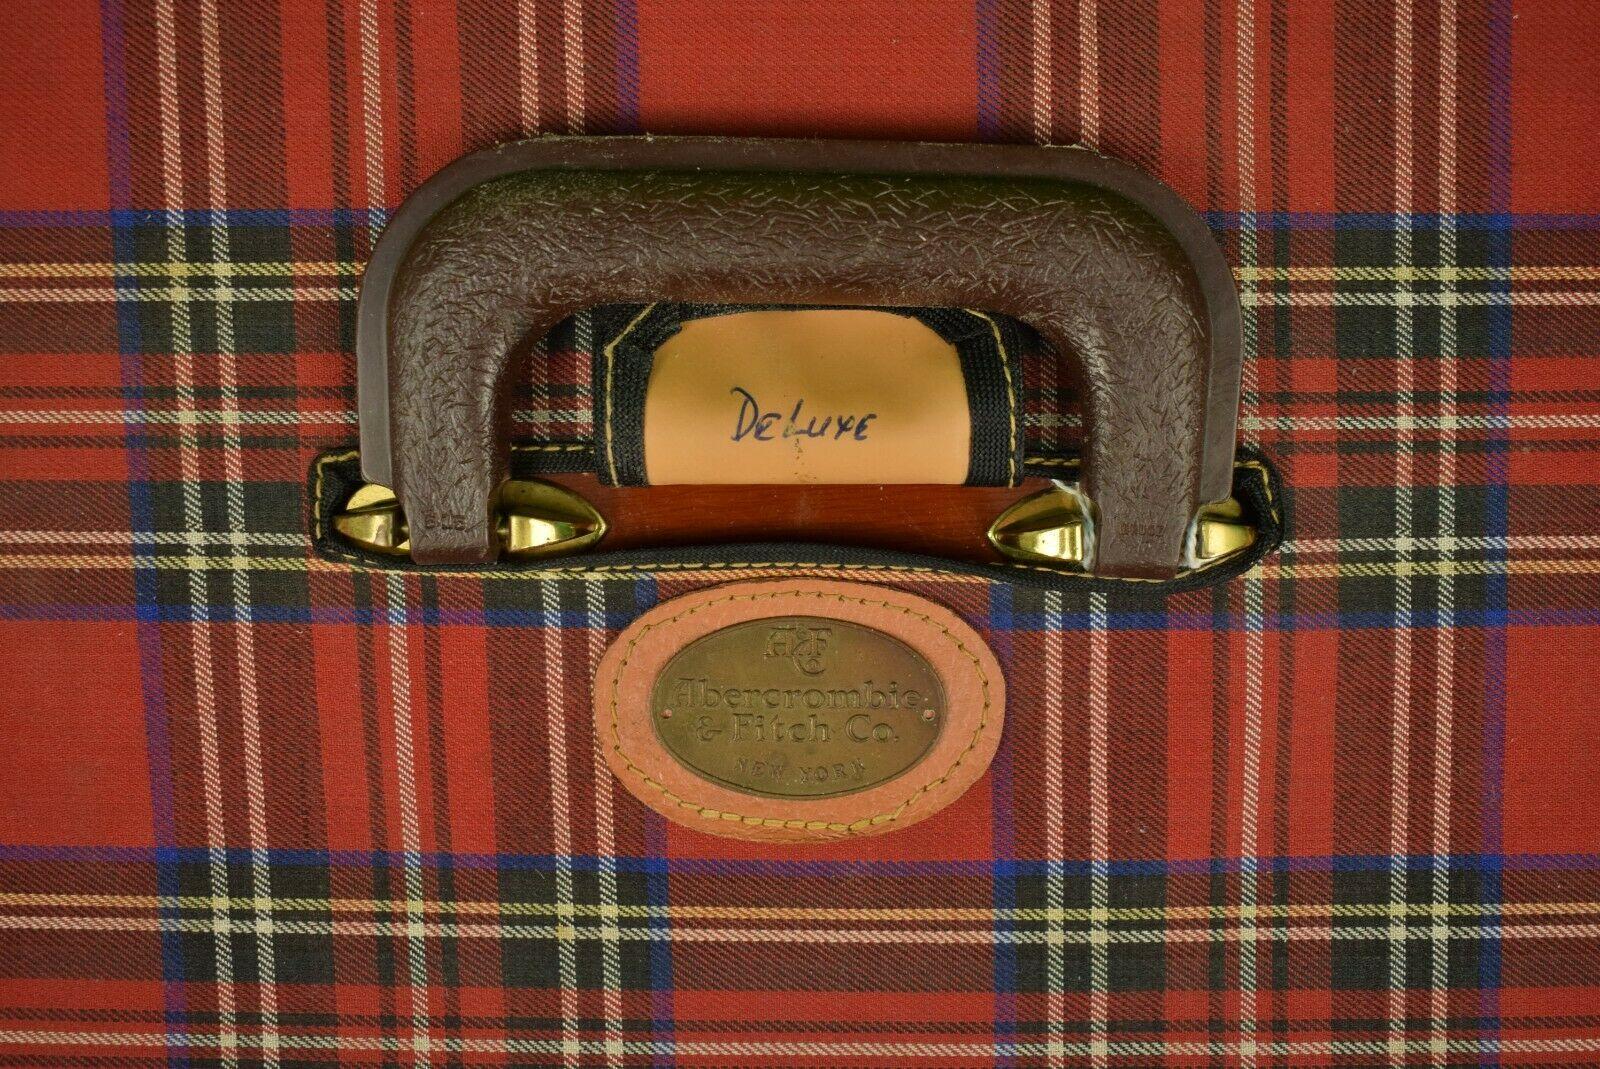 Abercrombie & Fitch Deluxe Mahogany Tackle Box w/ Royal Stewart Tartan Cover - Art by Unknown